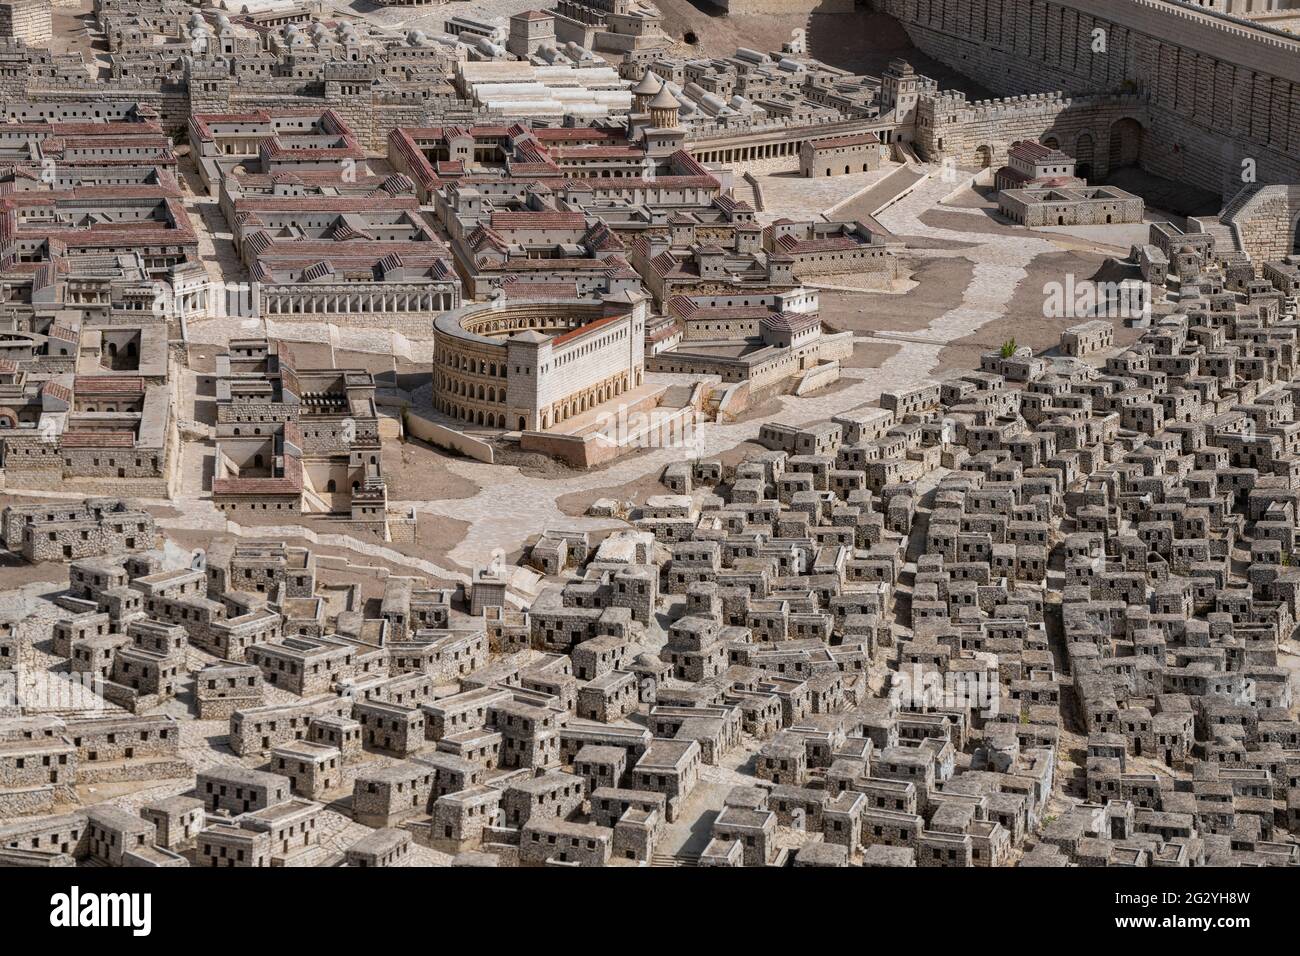 A 1:50 scale Holyland Model of Jerusalem, also known as Model of Jerusalem at the end of the Second Temple period. Israel Museum, Jerusalem. Israel Stock Photo